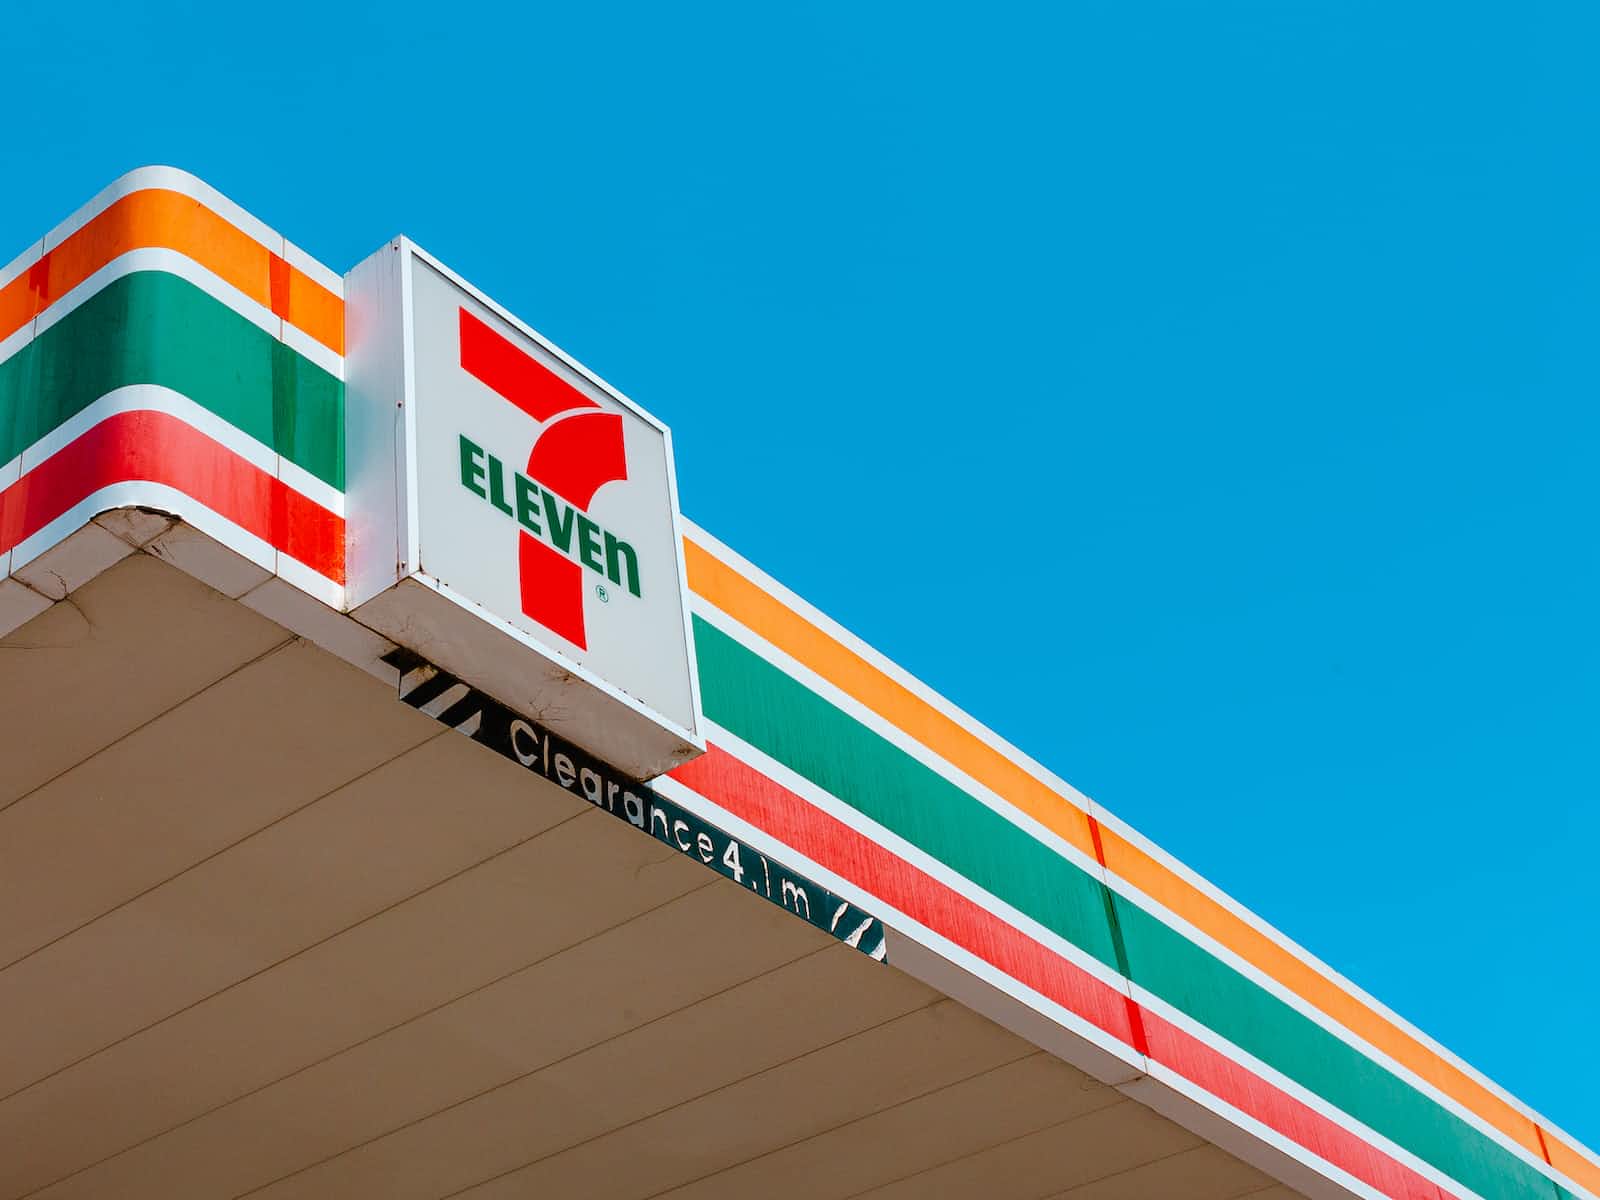 Seven Network challenges 7Eleven in battle over controversial branding move